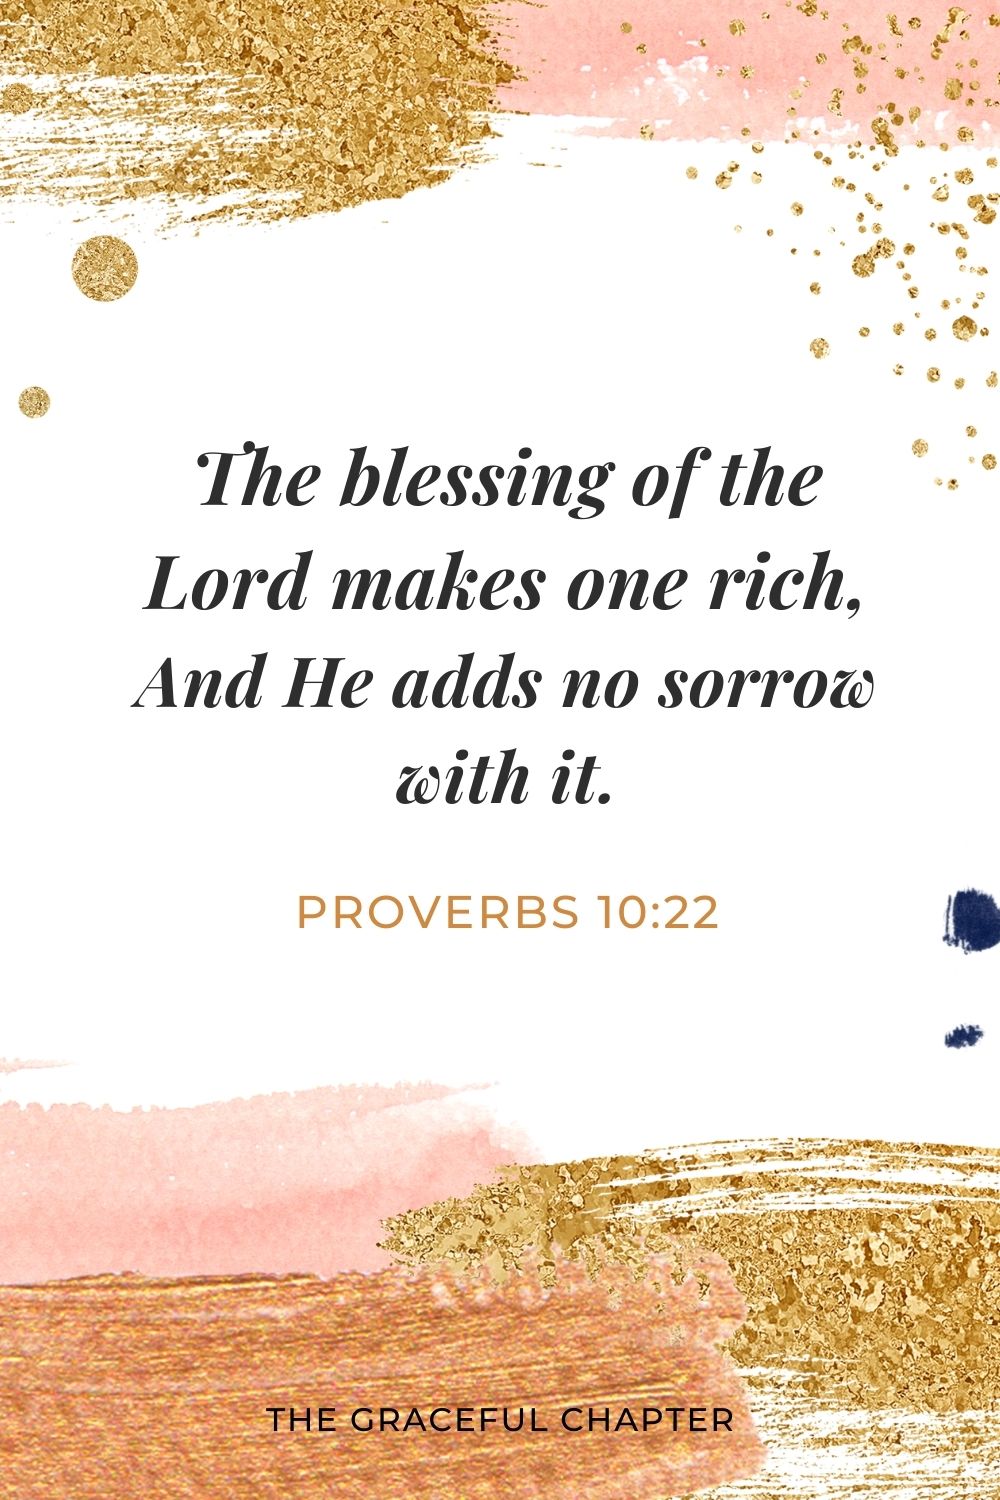 The blessing of the Lord makes one rich, And He adds no sorrow with it. Proverbs 10:22